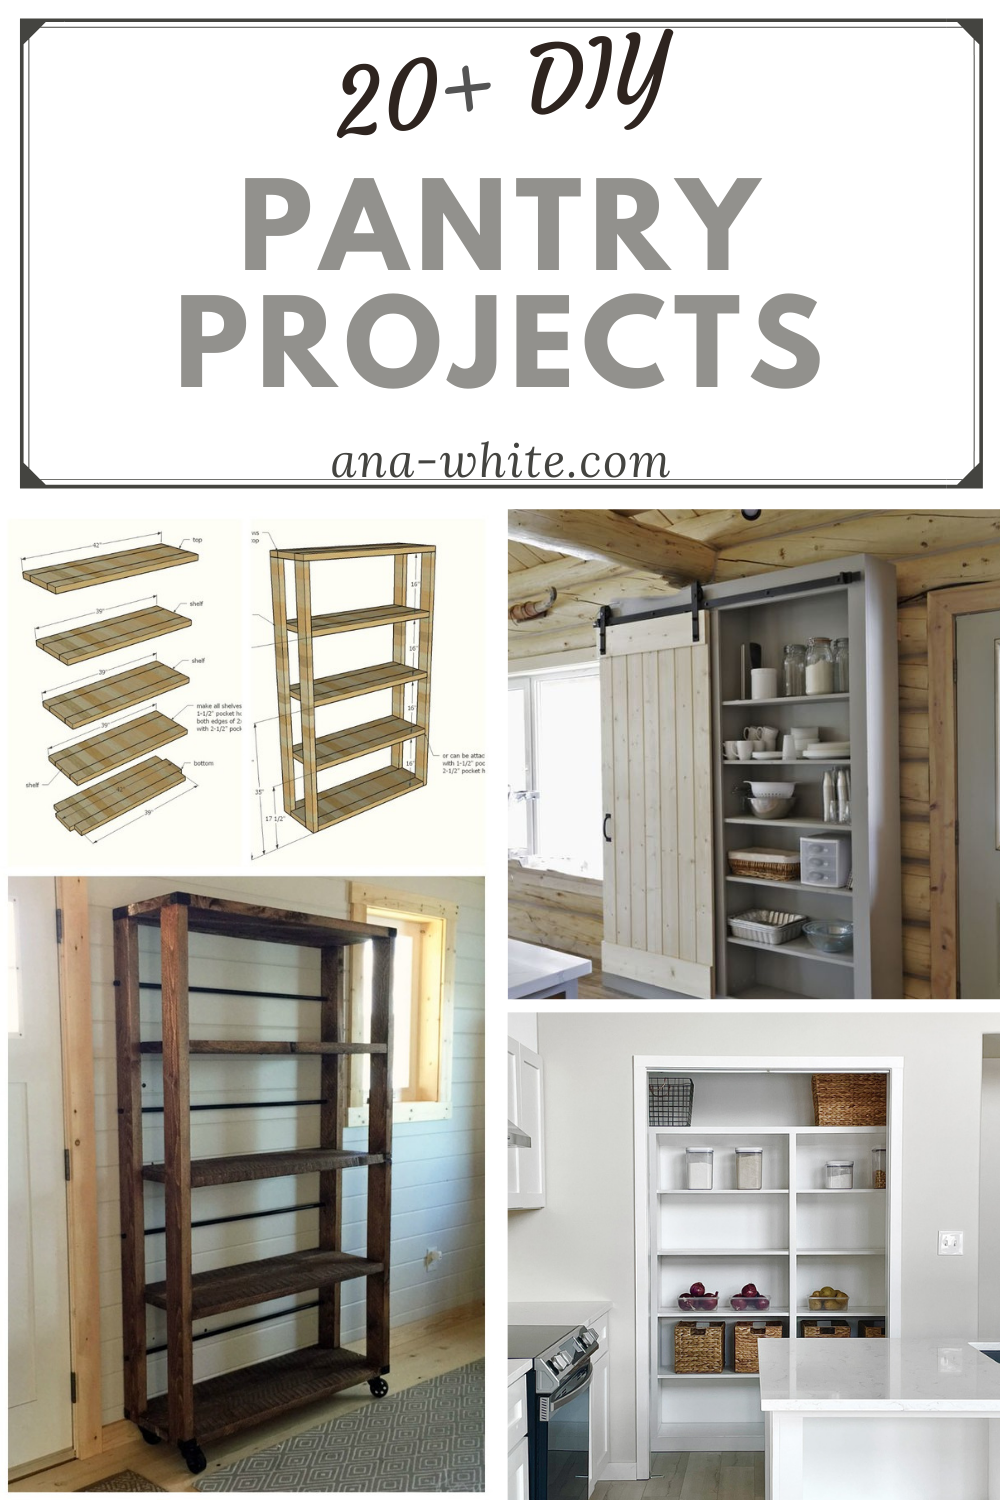 diy pantry project plans free pantry plans pantry 